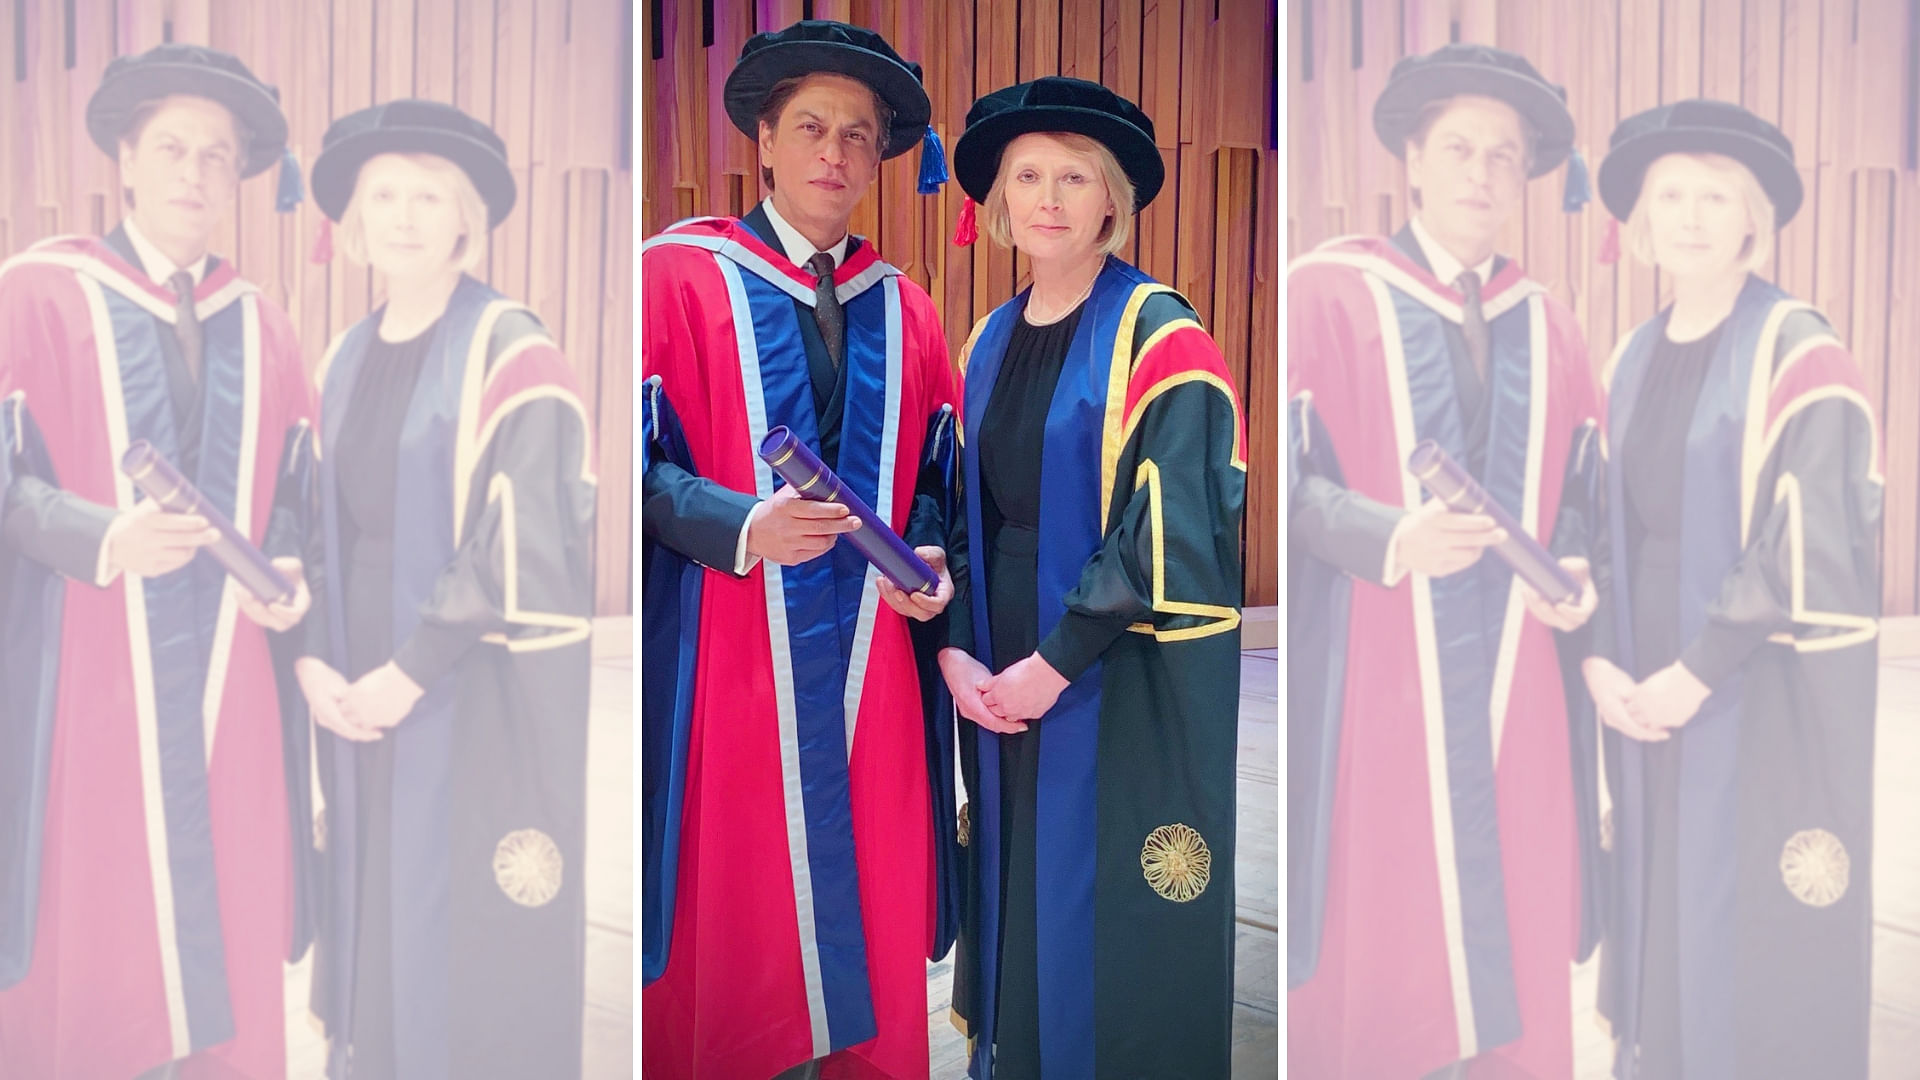 Shah Rukh Khan was awarded an honorary doctorate in Philanthropy by The University of Law, London.